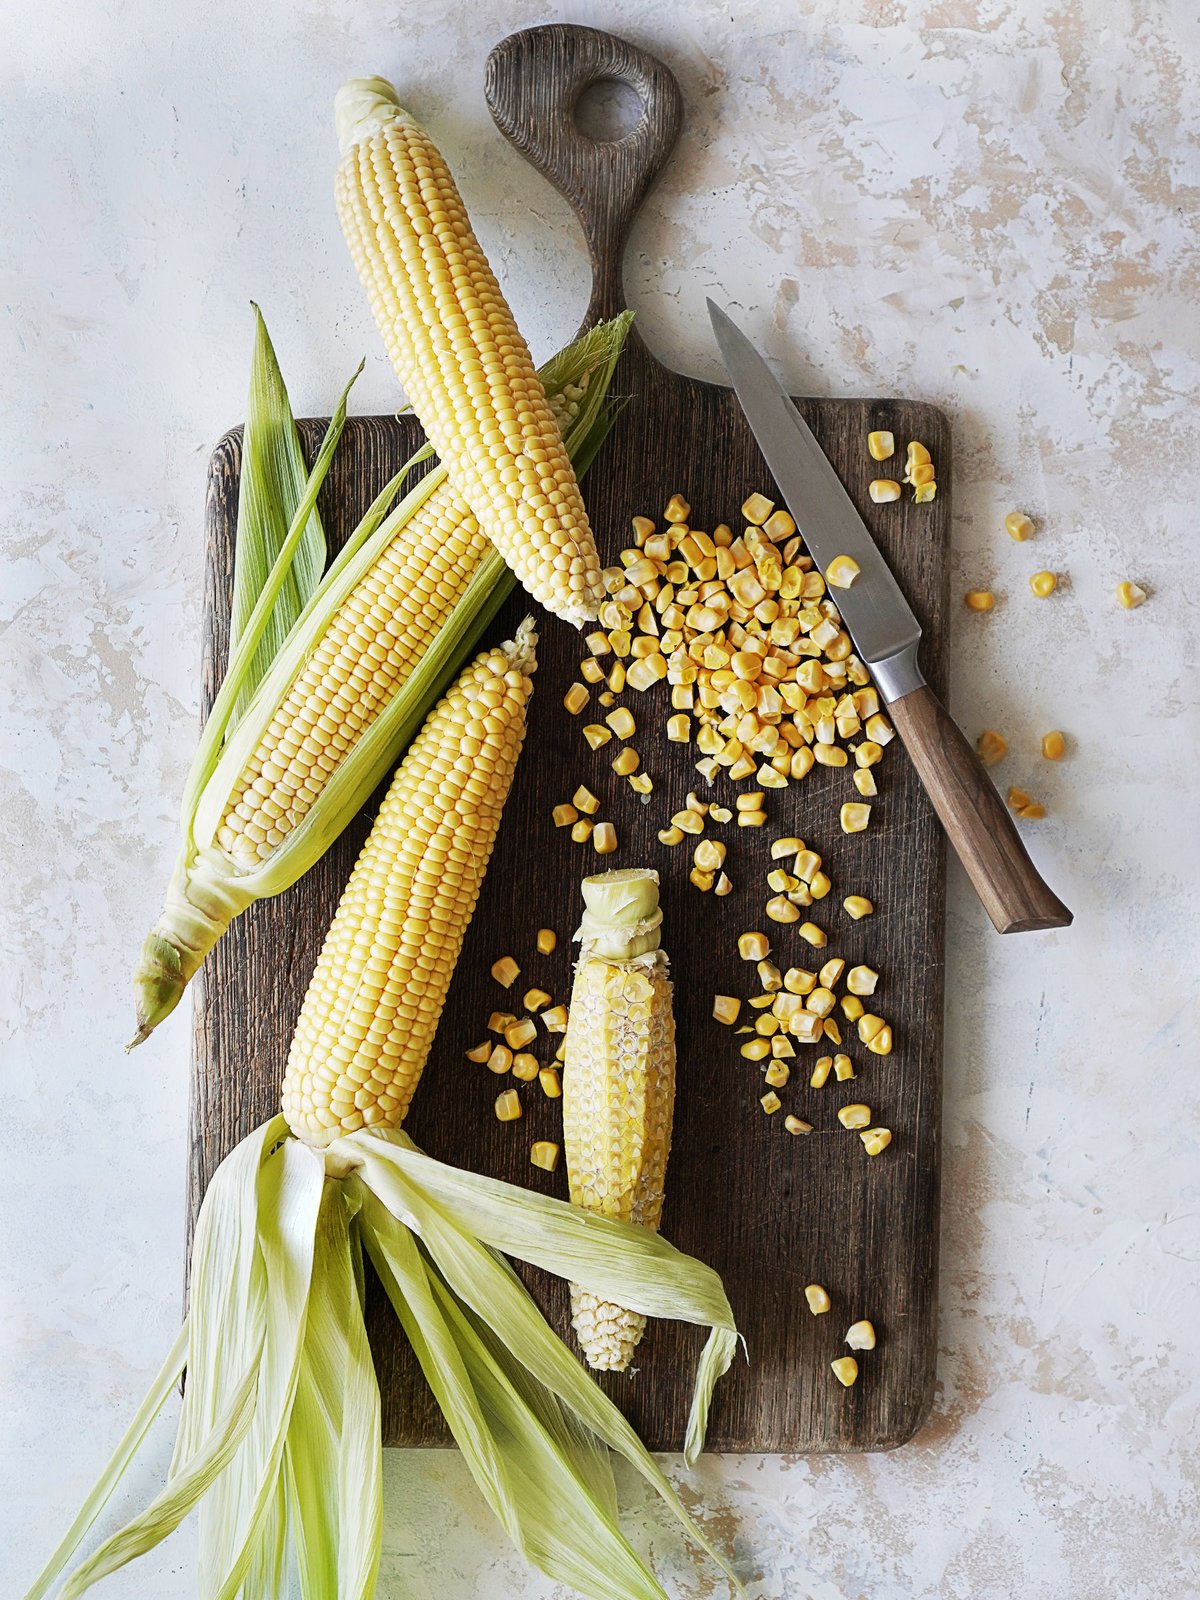 A pretty cutting board with whole corn on the cobs and a knife next to them.